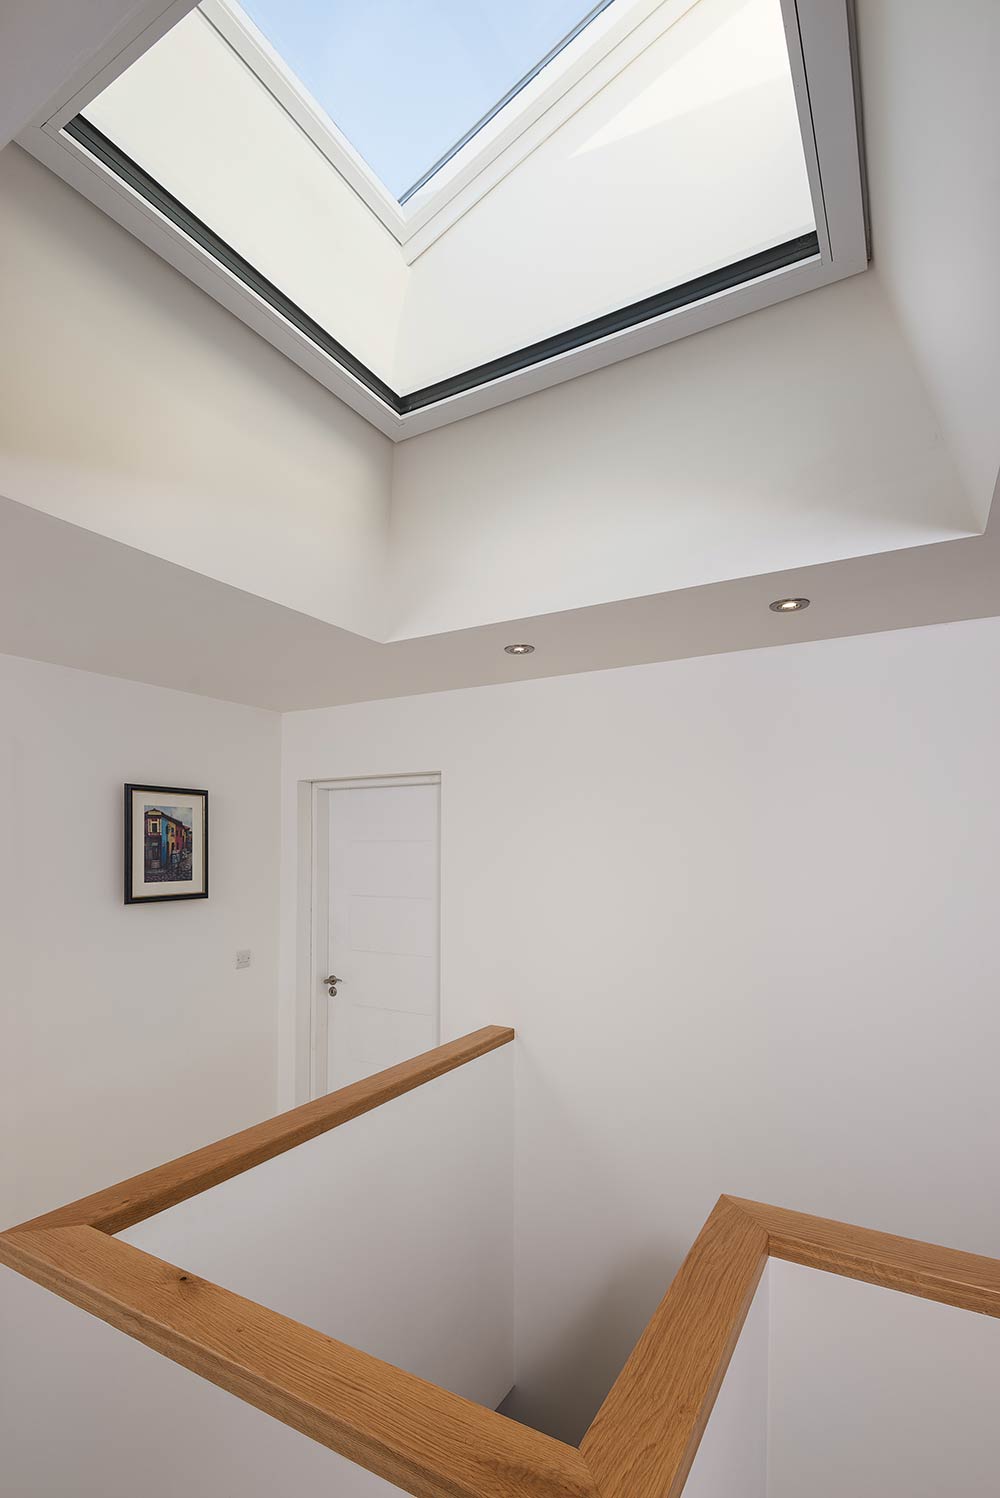 The house features a double-glazed Velux roof window for natural light, with a triple-glazed Munster Joinery Passiv Aluclad window lying horizontal underneath this near the top of the insulation layer